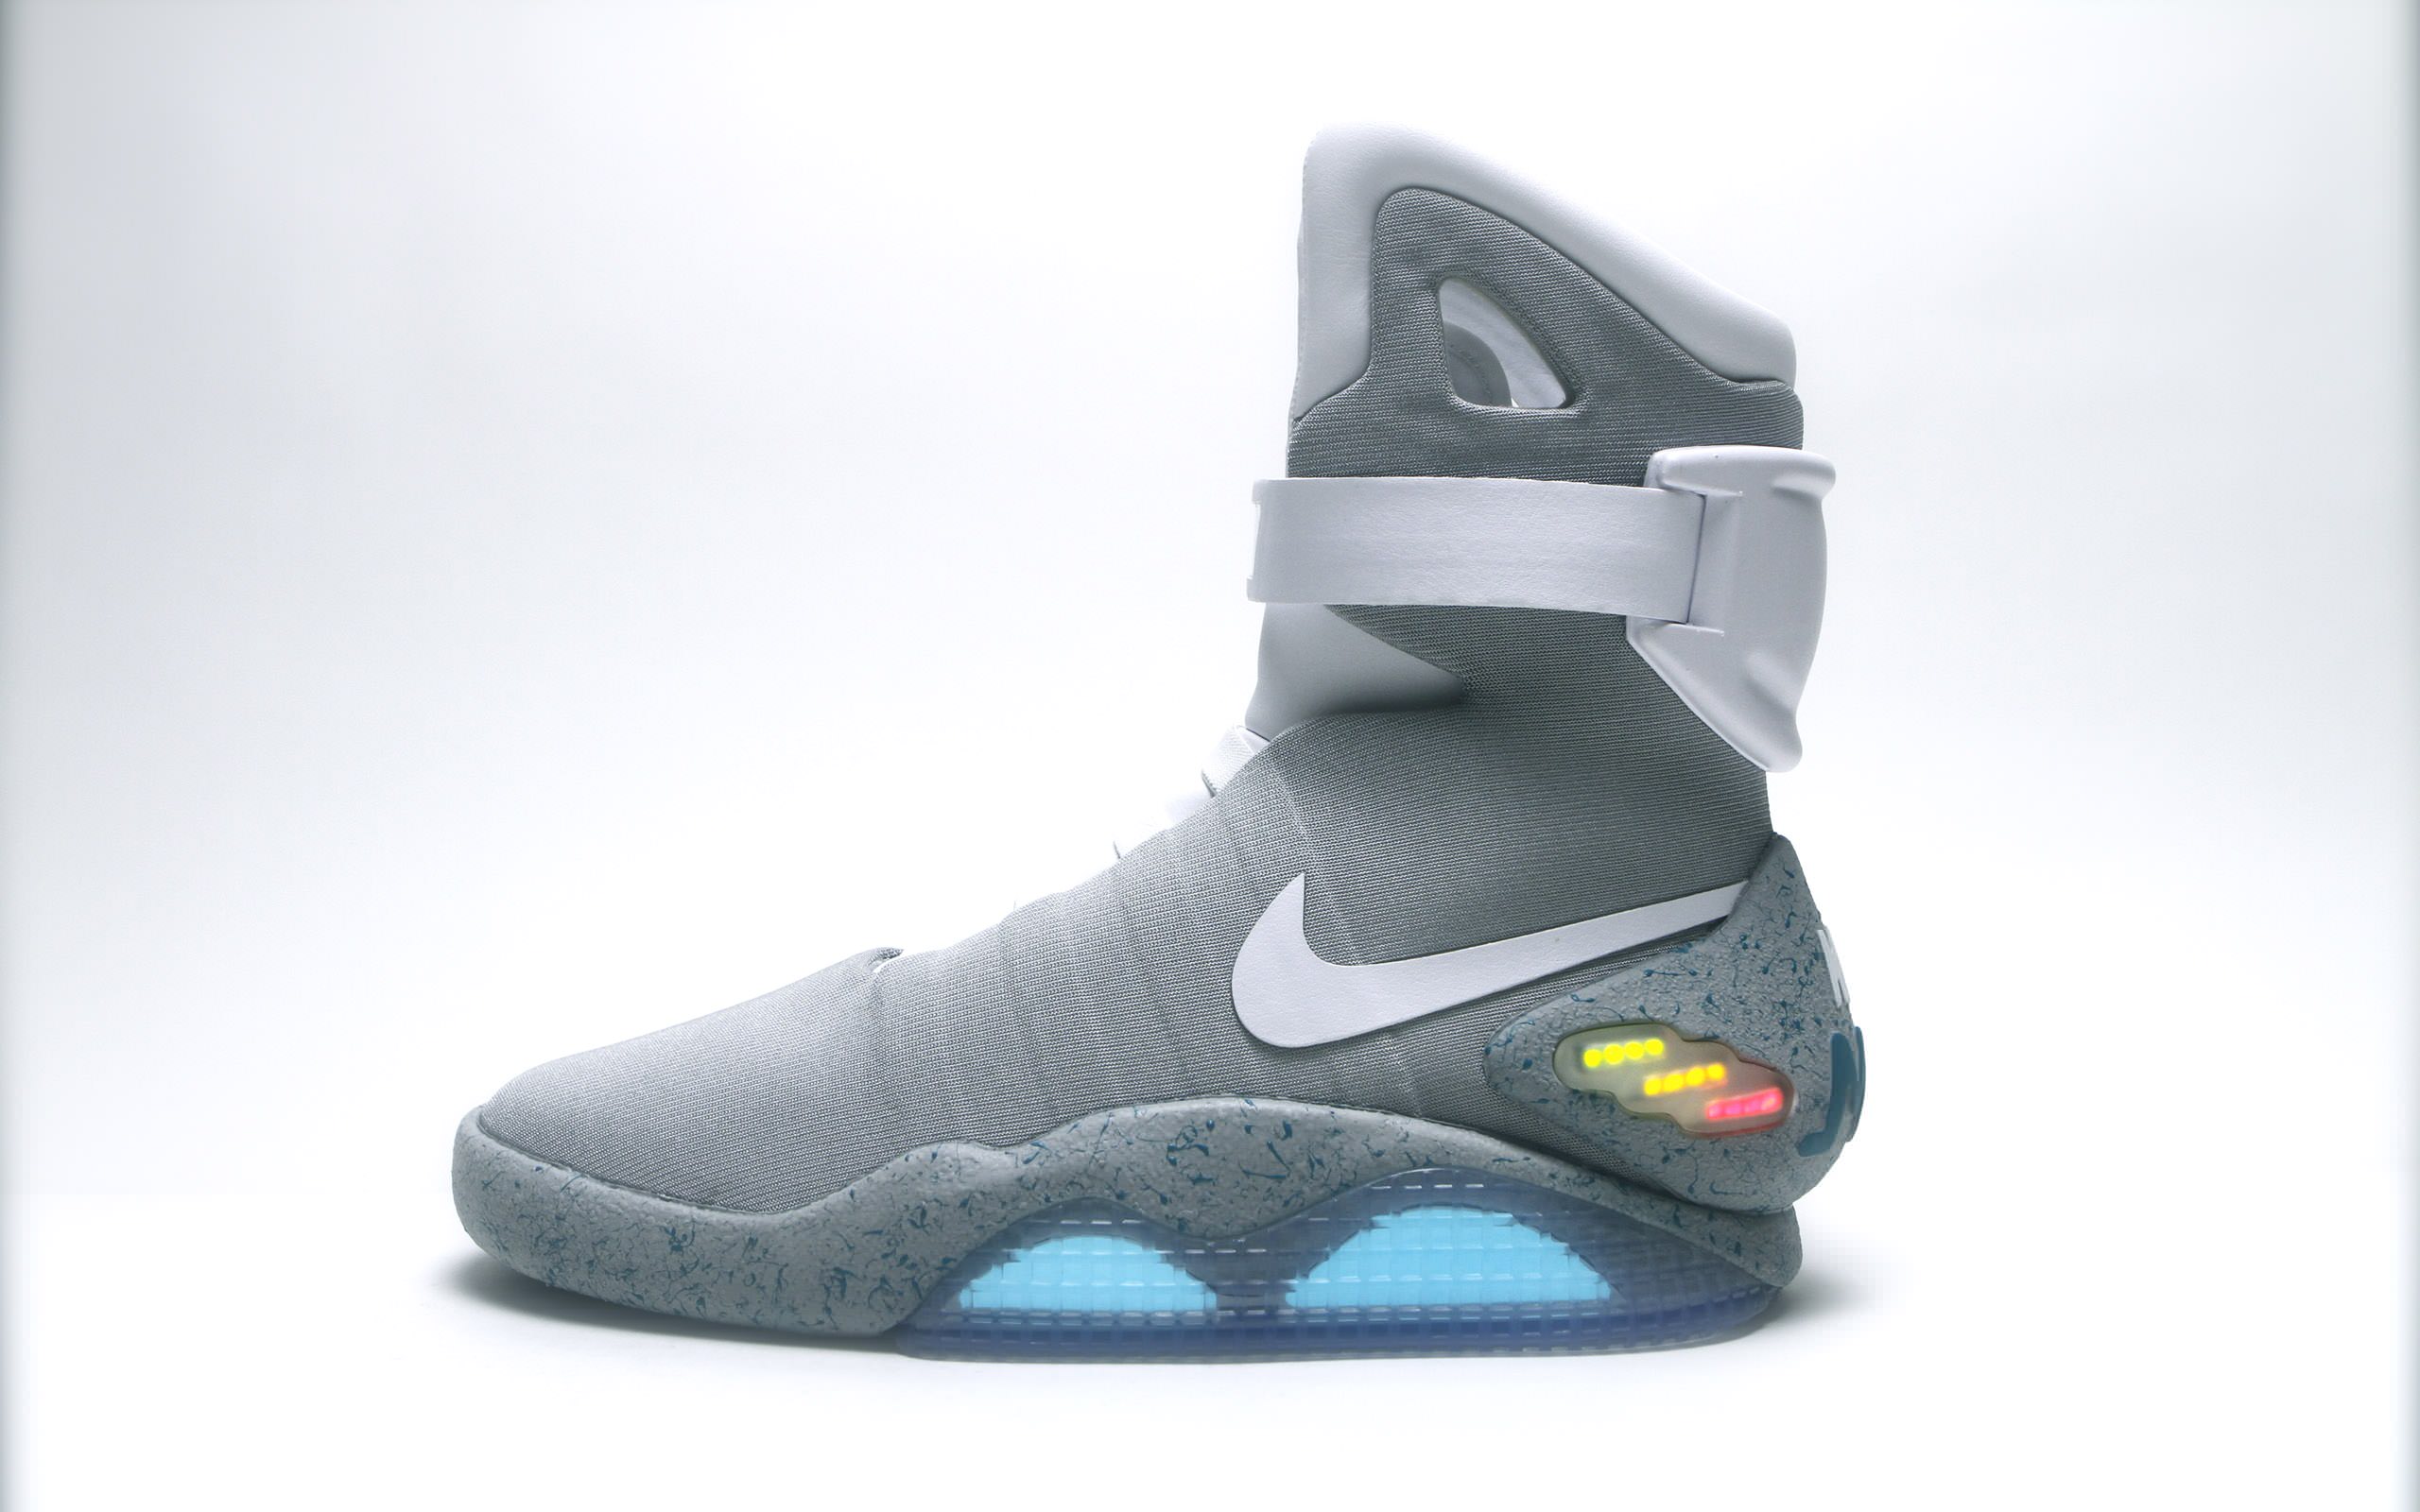 Back to the Future Part II Nike MAG 